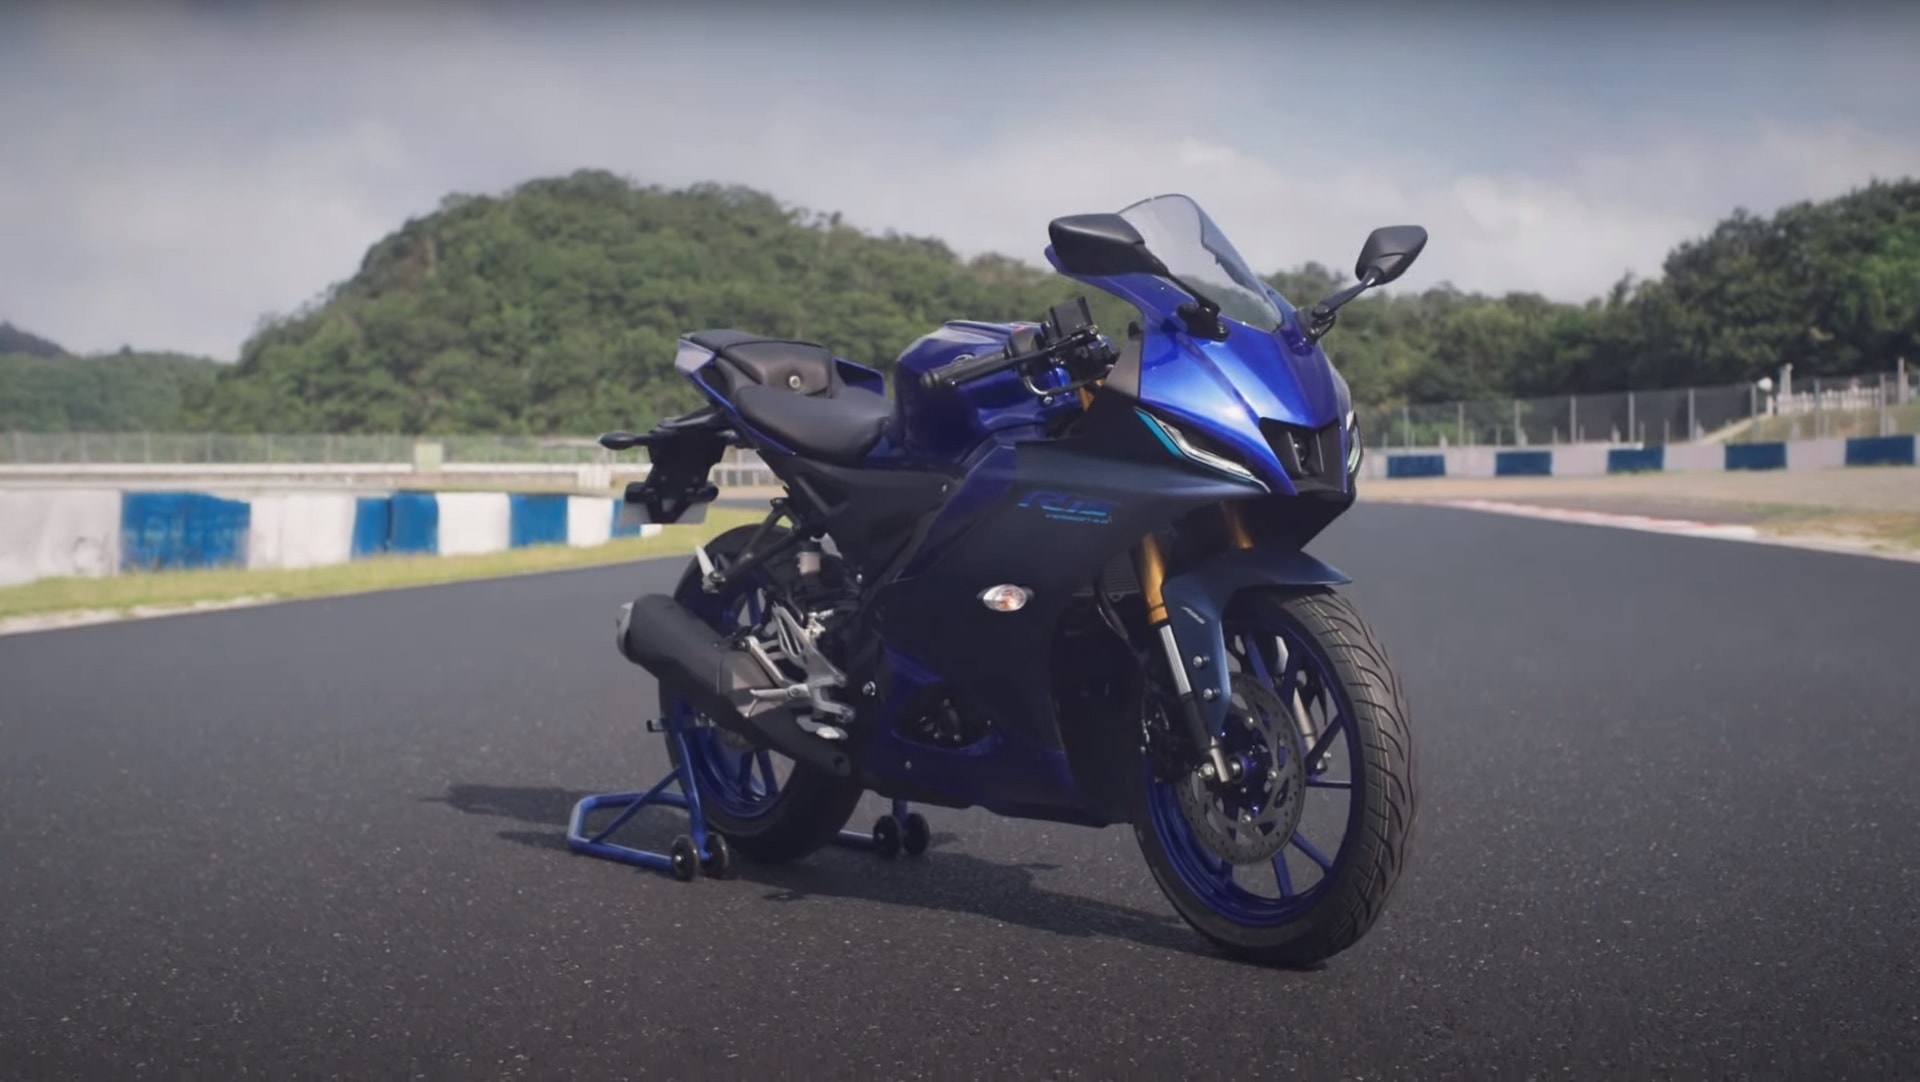 Yamaha Unveils All-New 2022 YZF-R7 Supersport Motorcycle